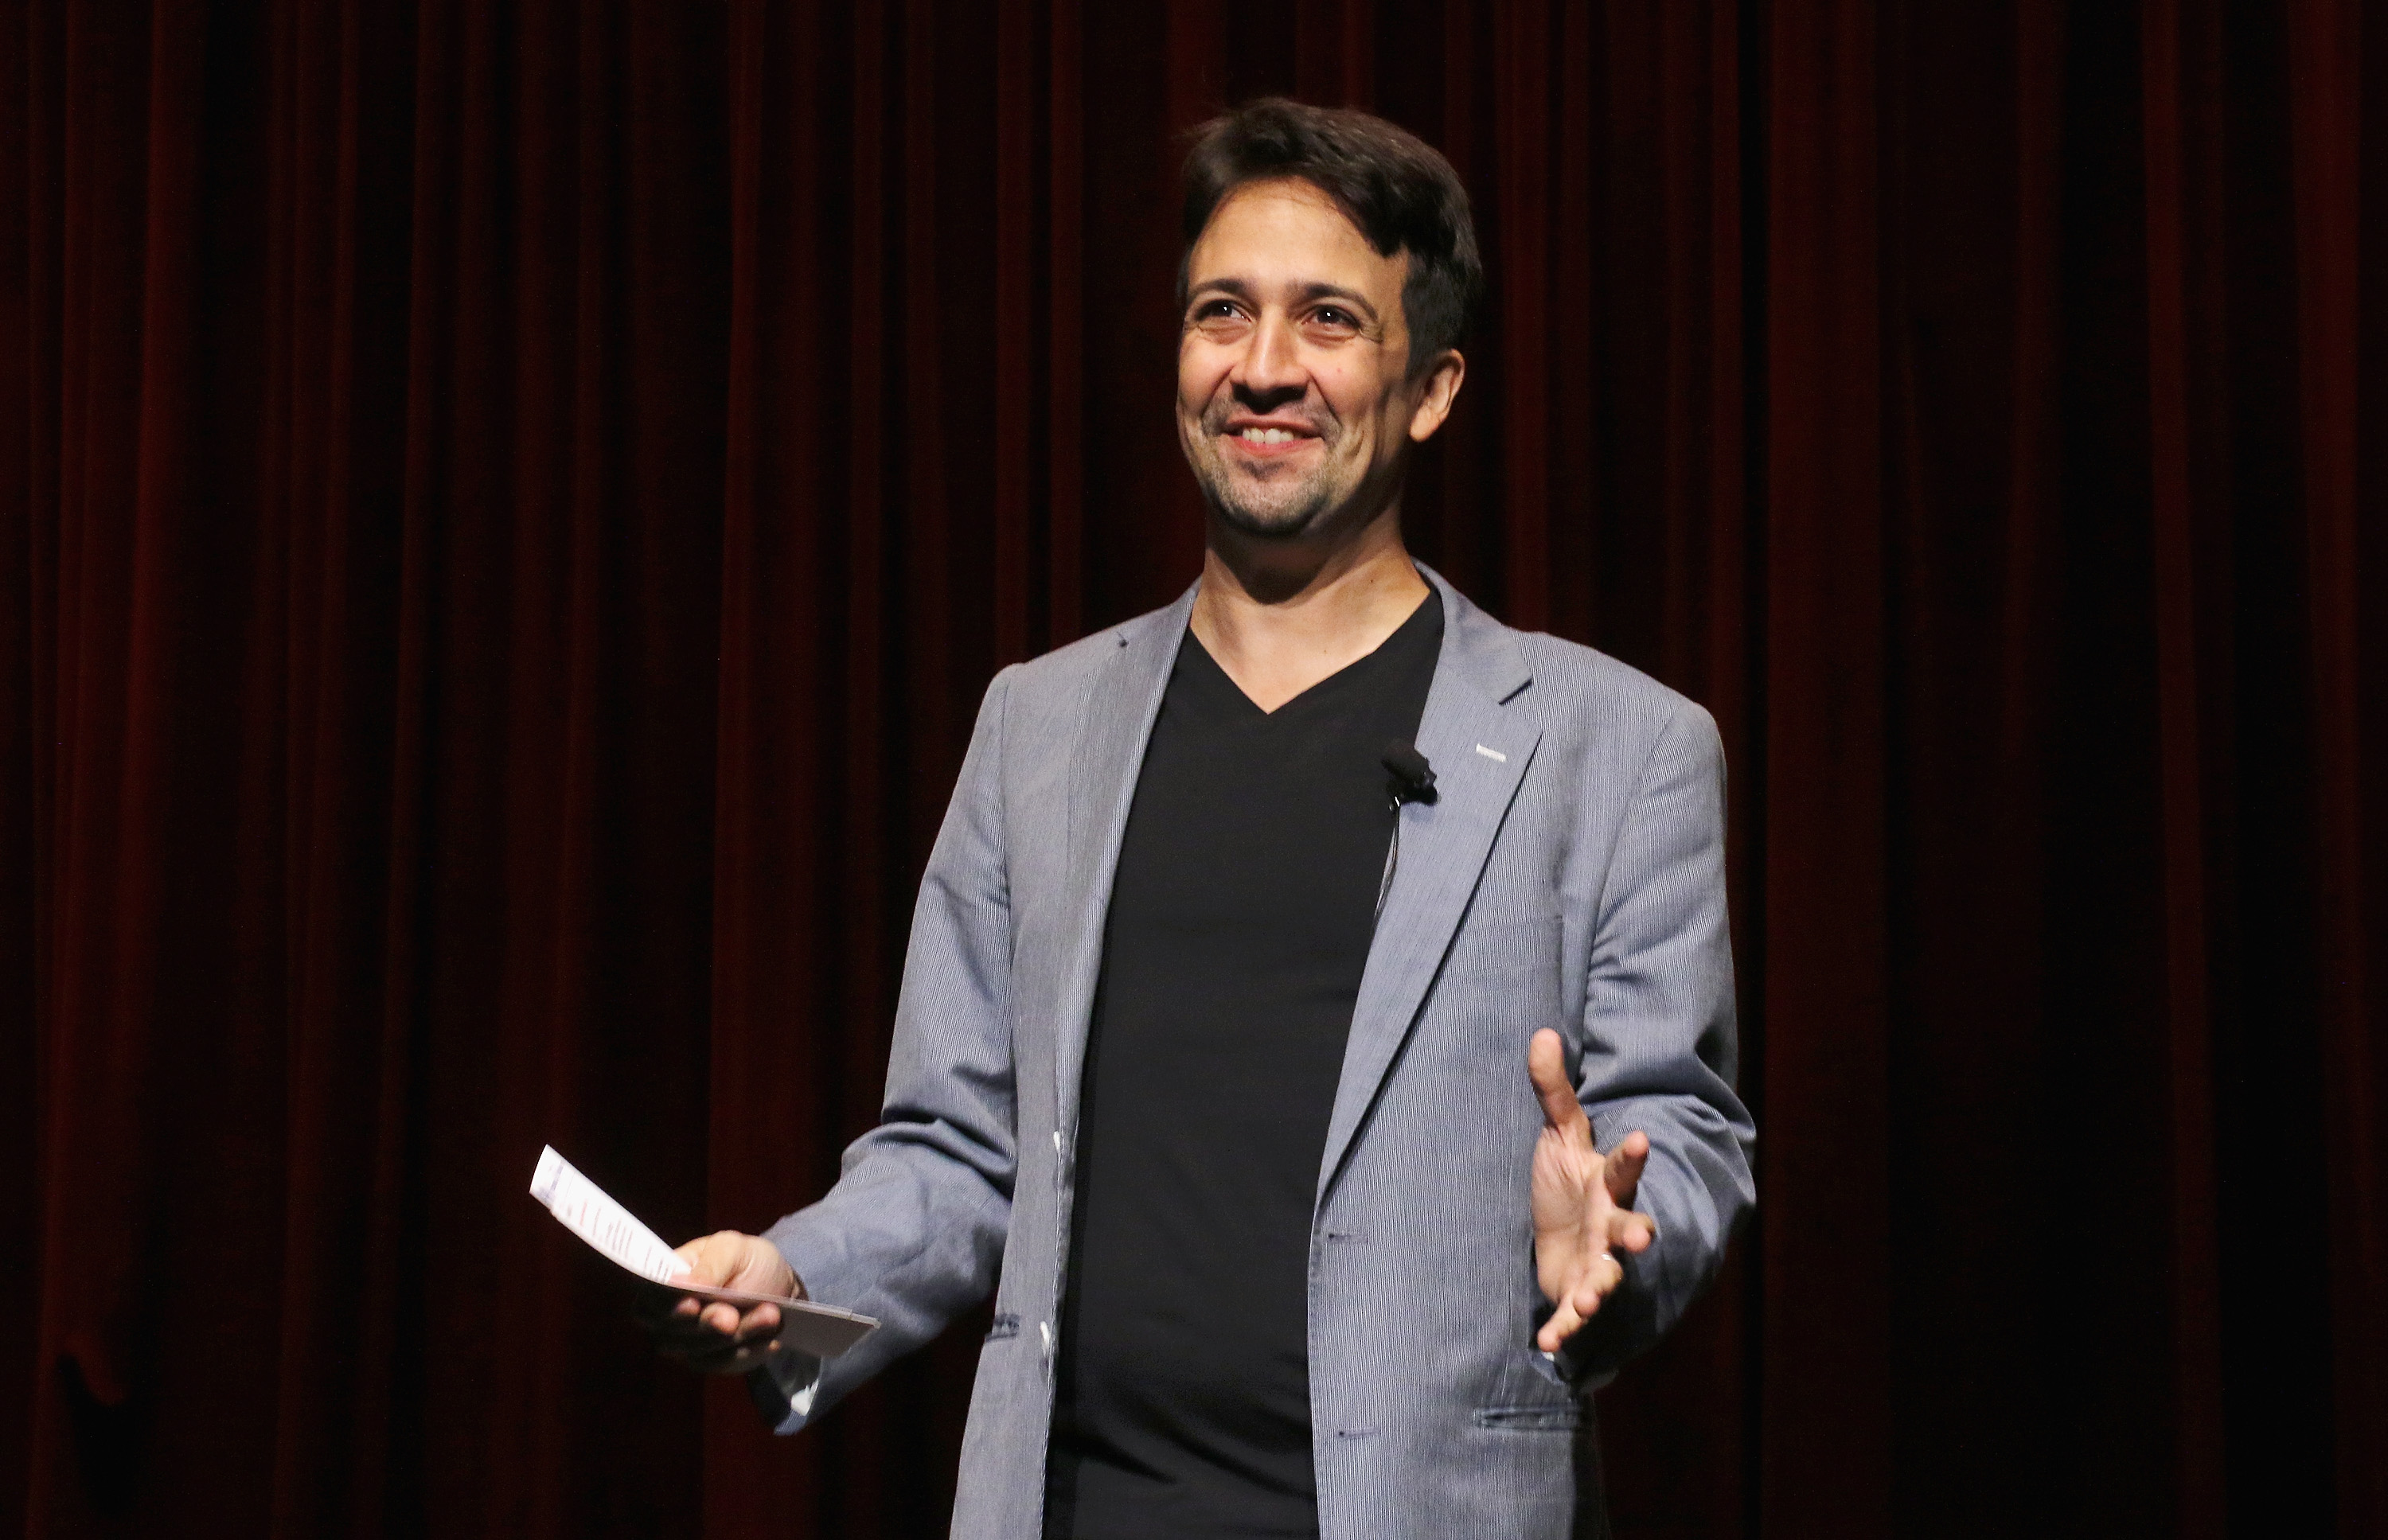 Actor Lin-Manuel Miranda attends the"Grease: Live" panel &amp; reception at The Edison Ballroom on August 15, 2016 in New York City. (Jim Spellman&mdash;WireImage/Getty Images)